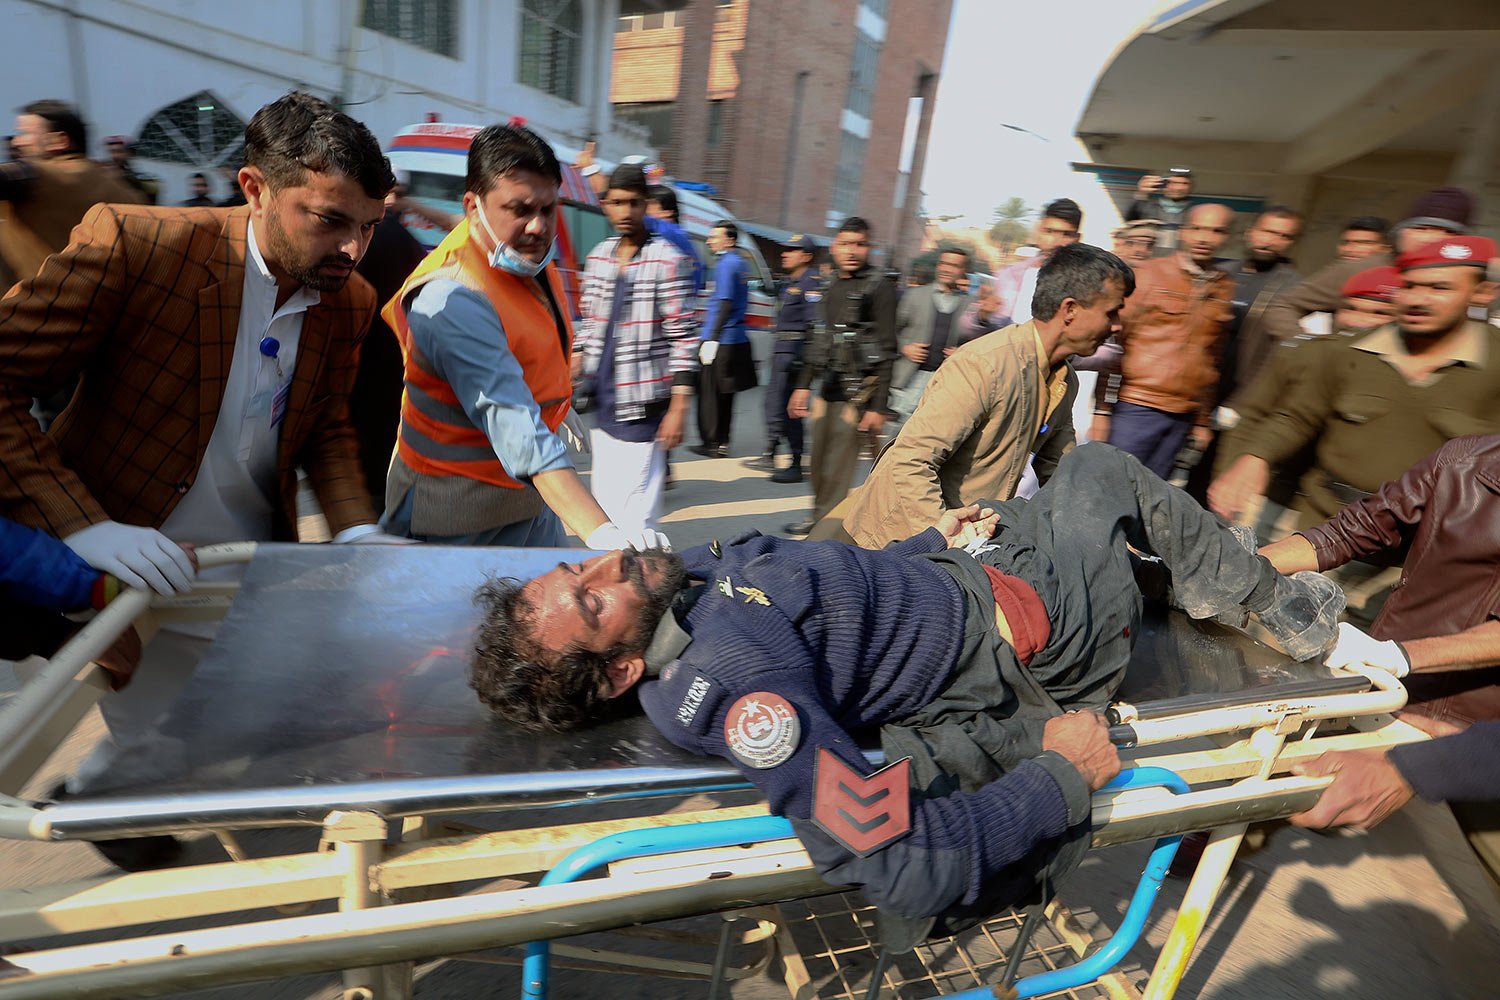  Workers and volunteers carry an injured victim of a suicide bombing upon arrival at a hospital in Peshawar, Pakistan, Monday, Jan. 30, 2023. (AP Photo/Muhammad Sajjad) 